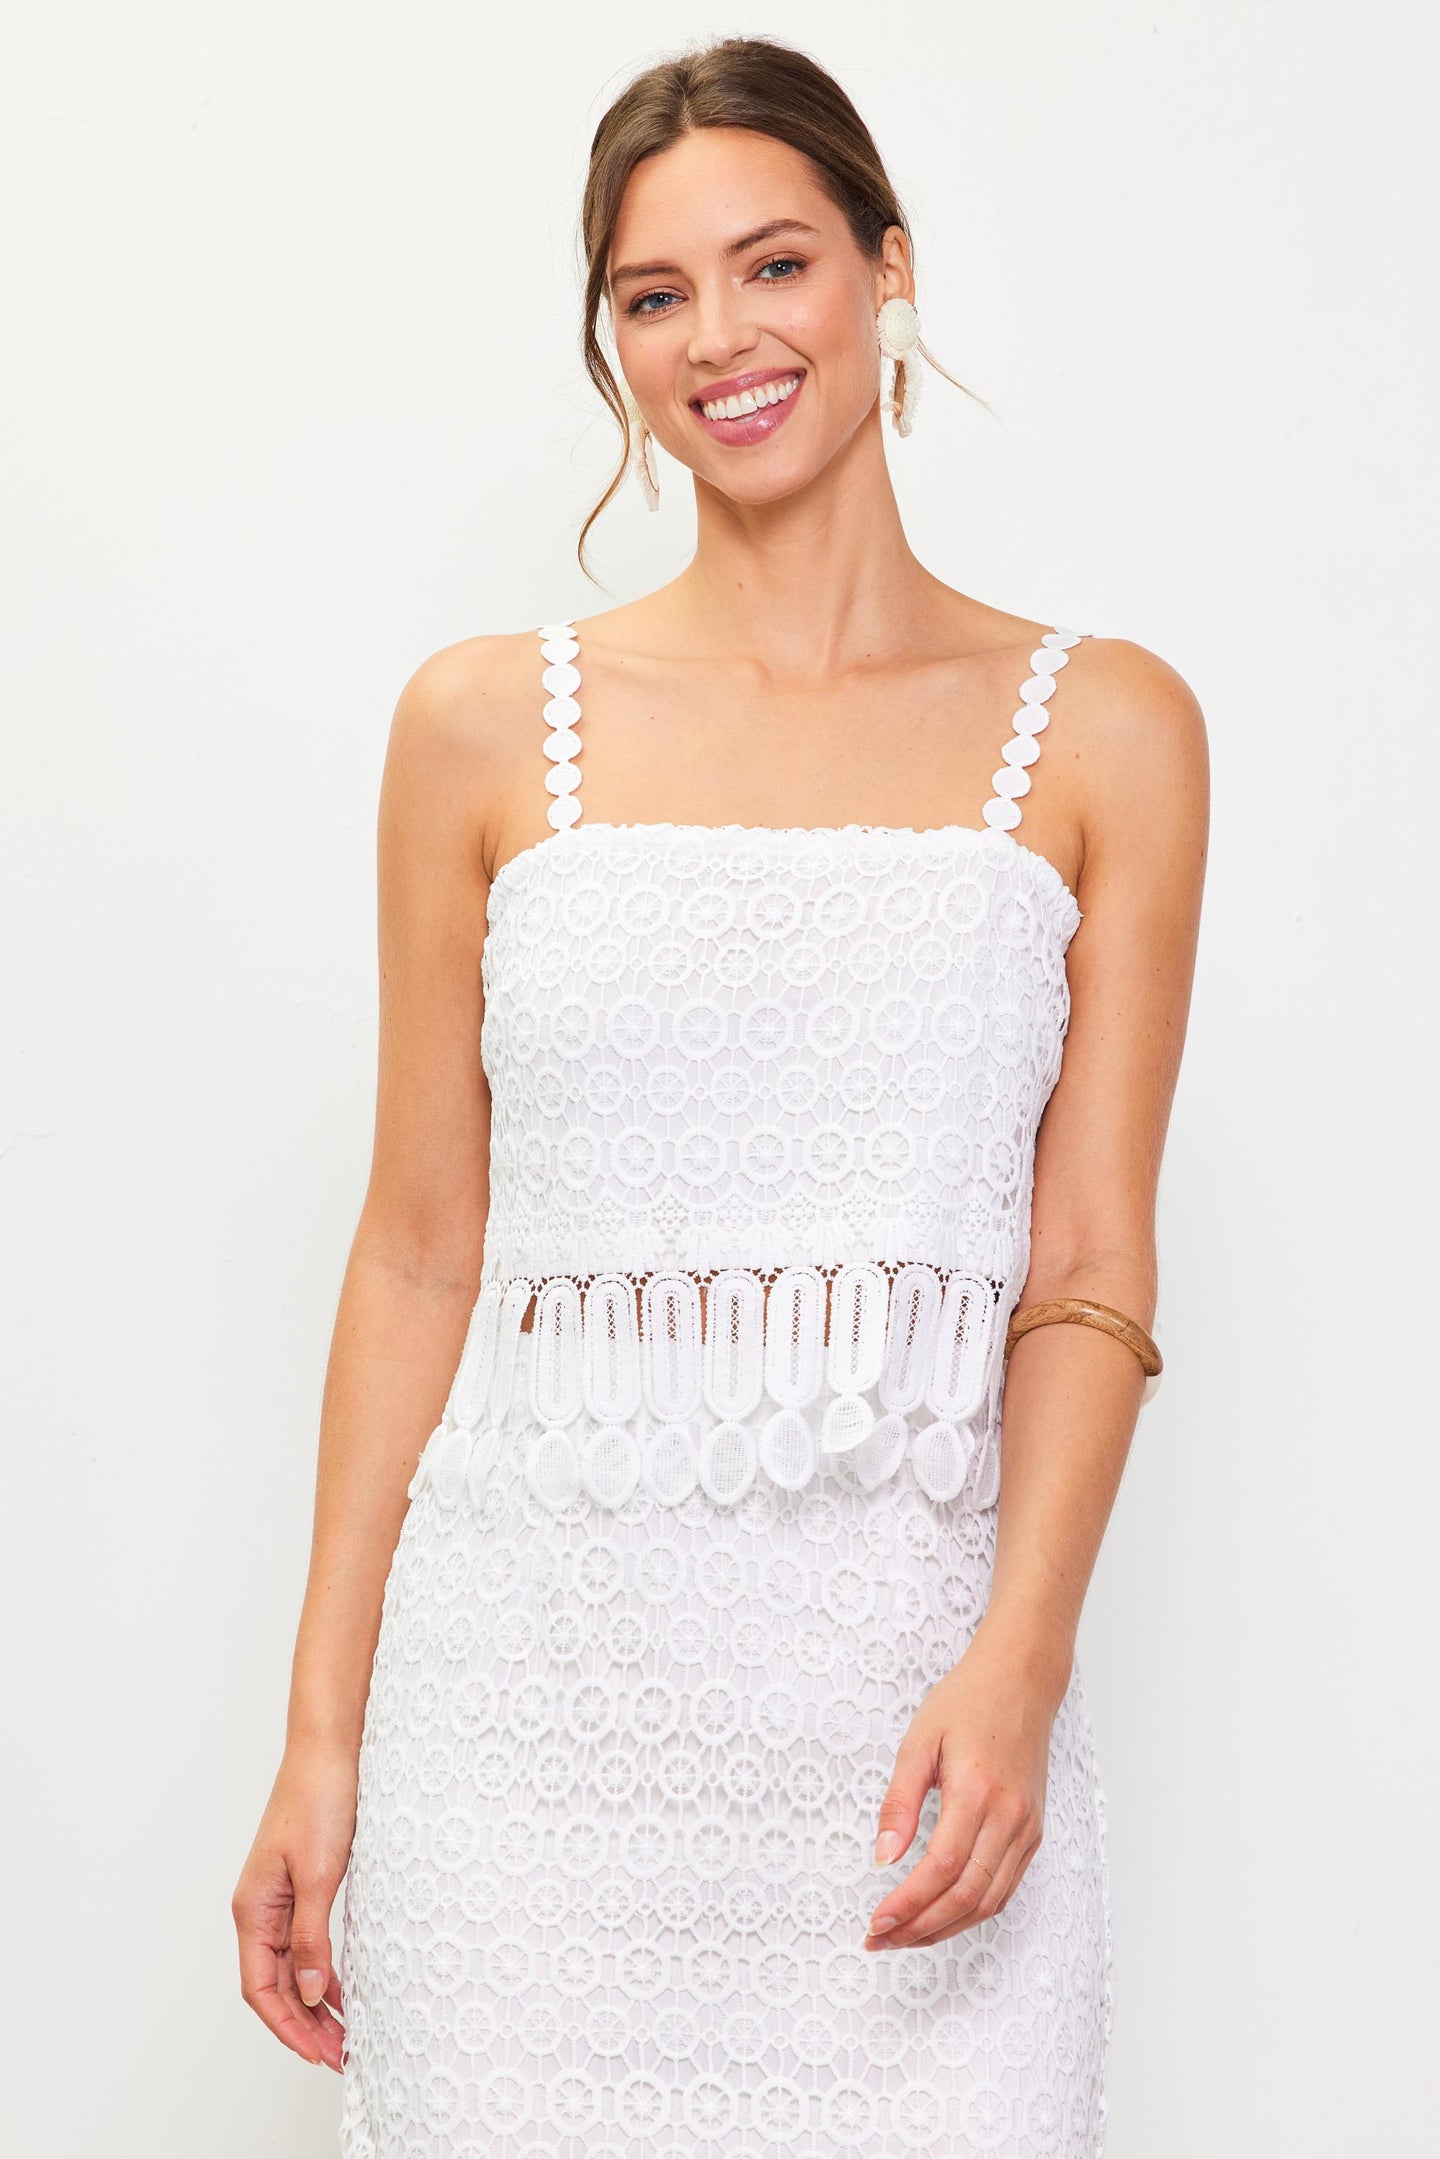 Crochet Cami With Fringe Detail